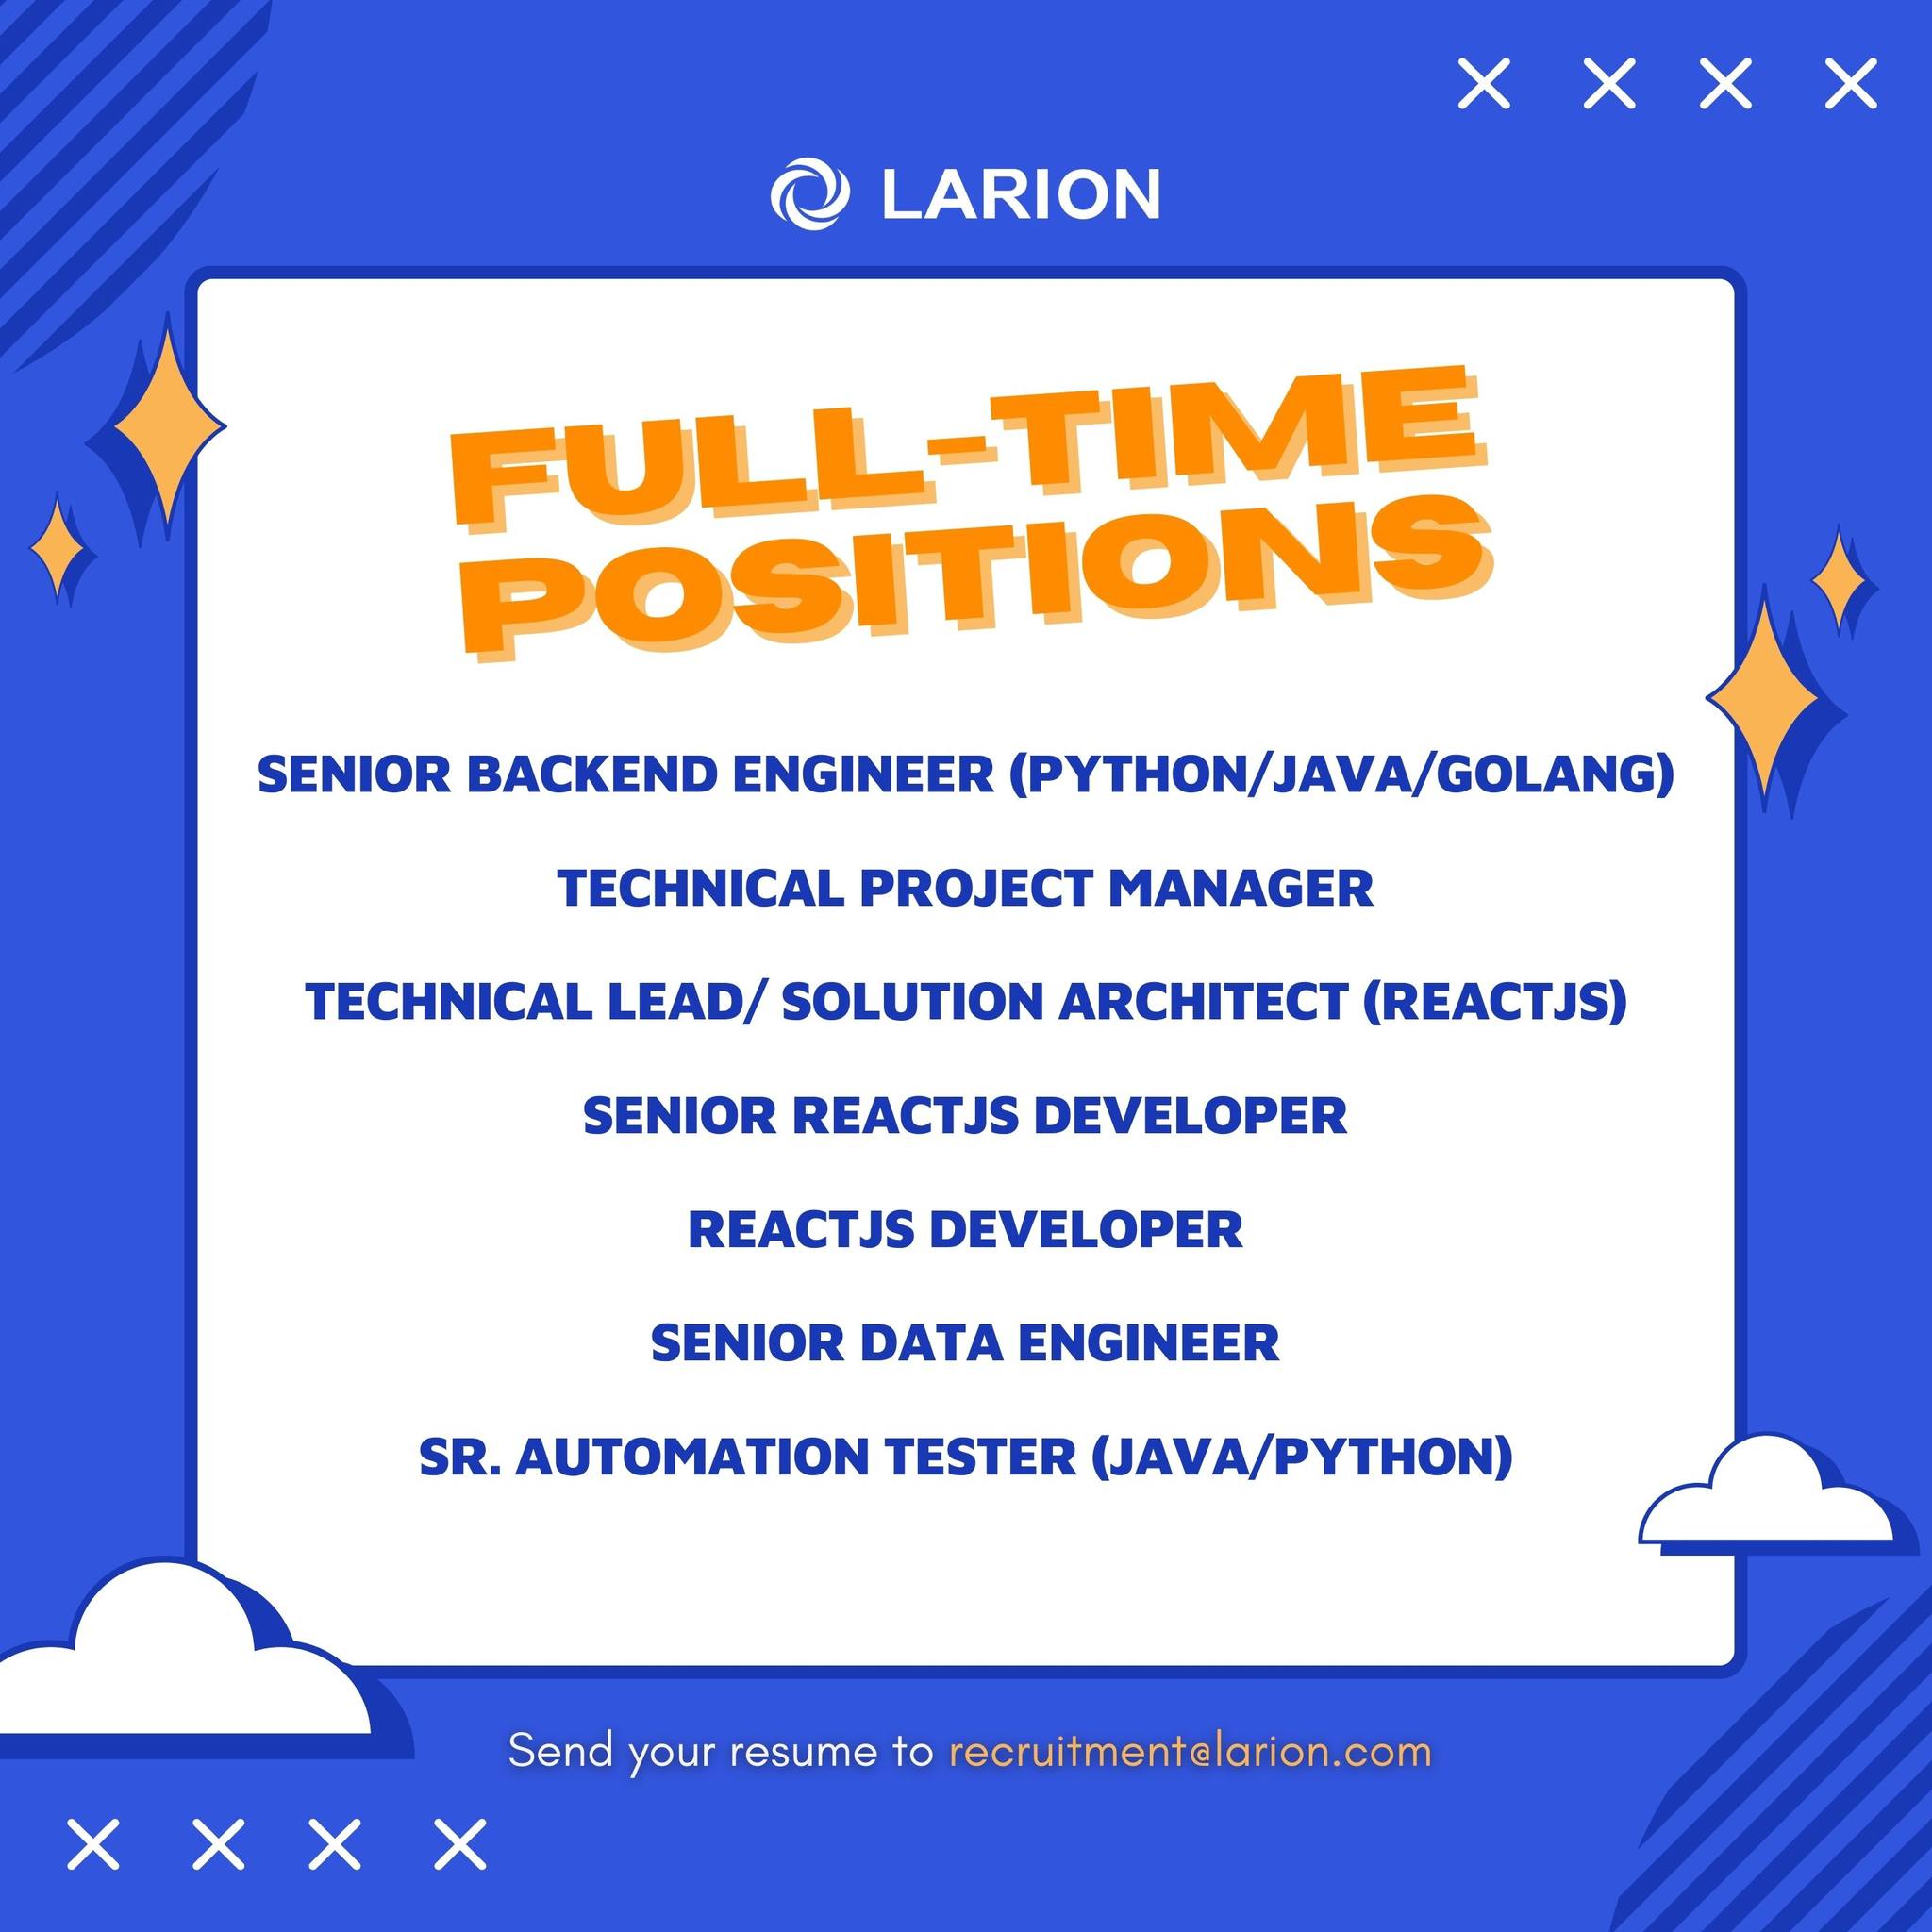 Job opportunities at Larion